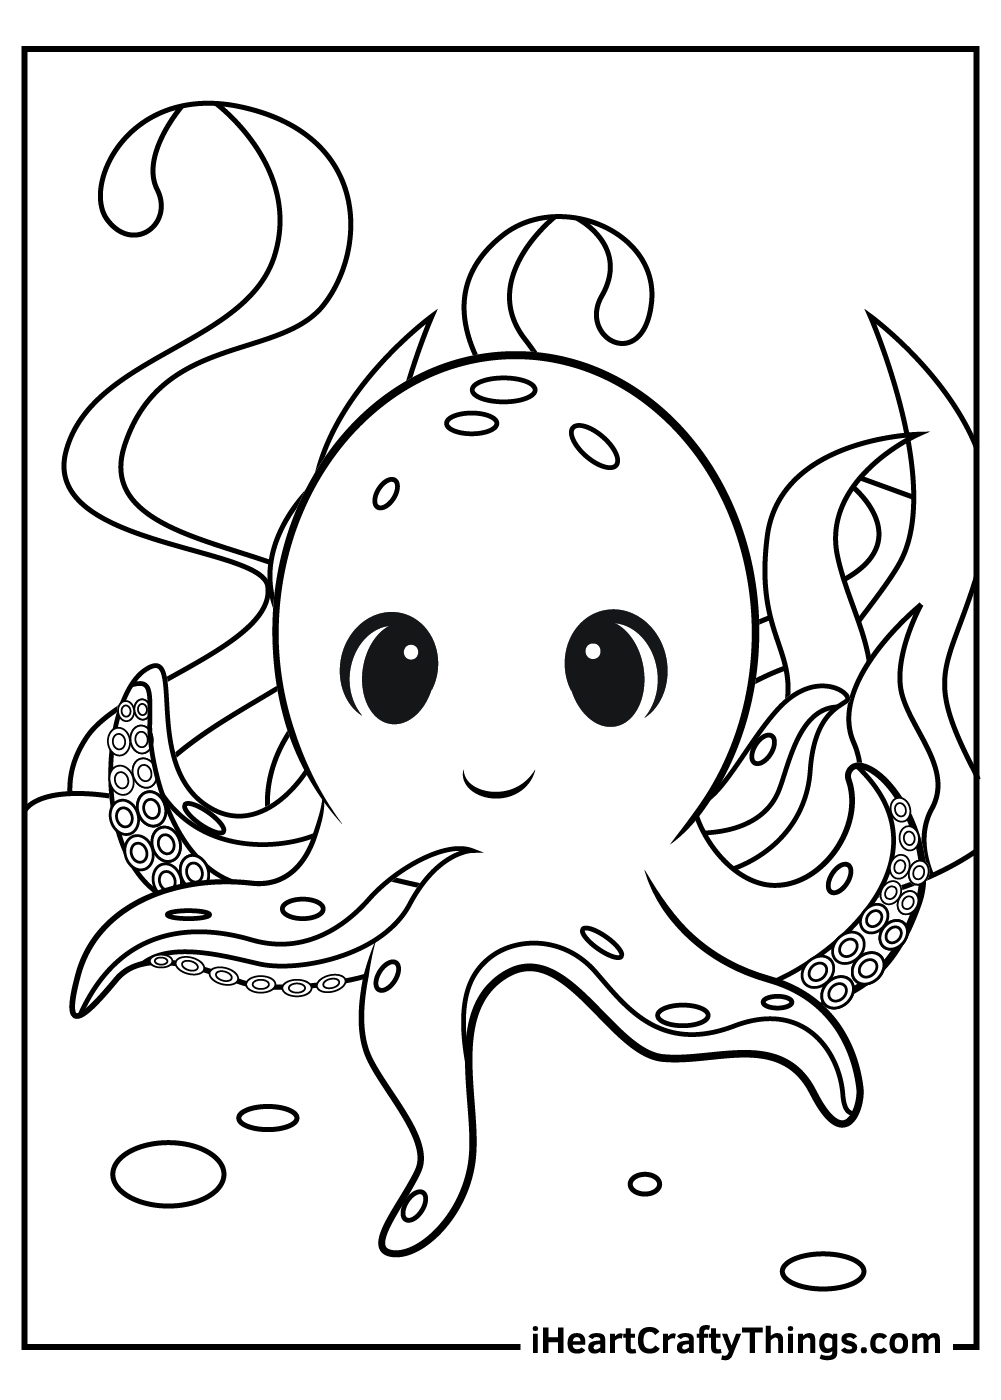 Printable Octopus Coloring Pages Updated 20